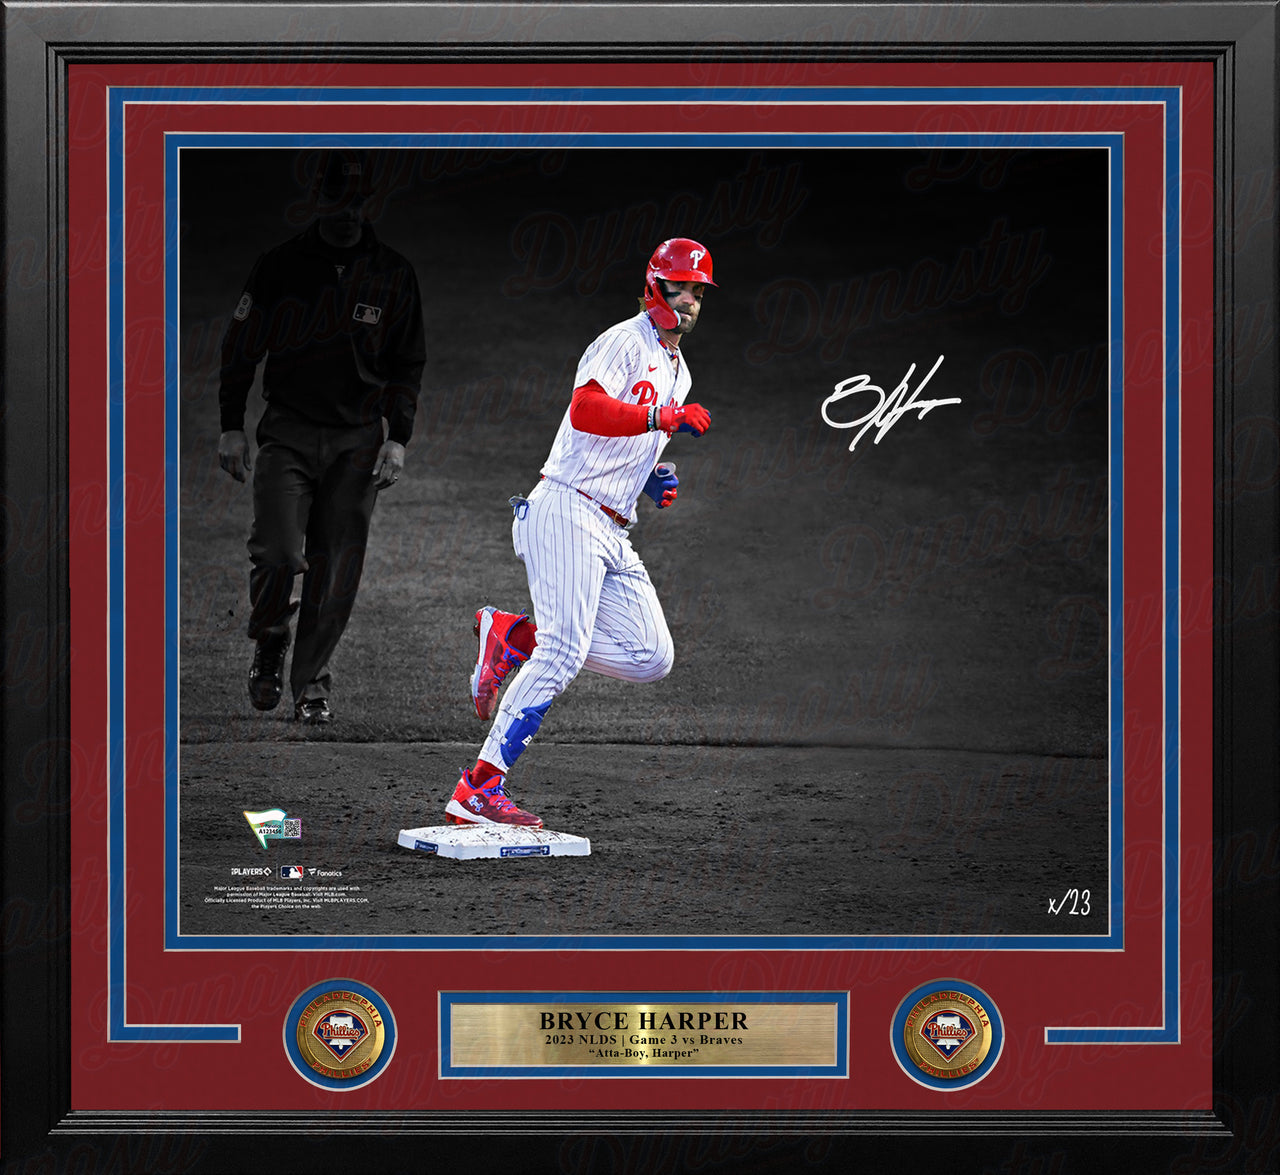 Bryce Harper Stares Down Arcia Philadelphia Phillies Autographed 16" x 20" Framed Blackout Photo